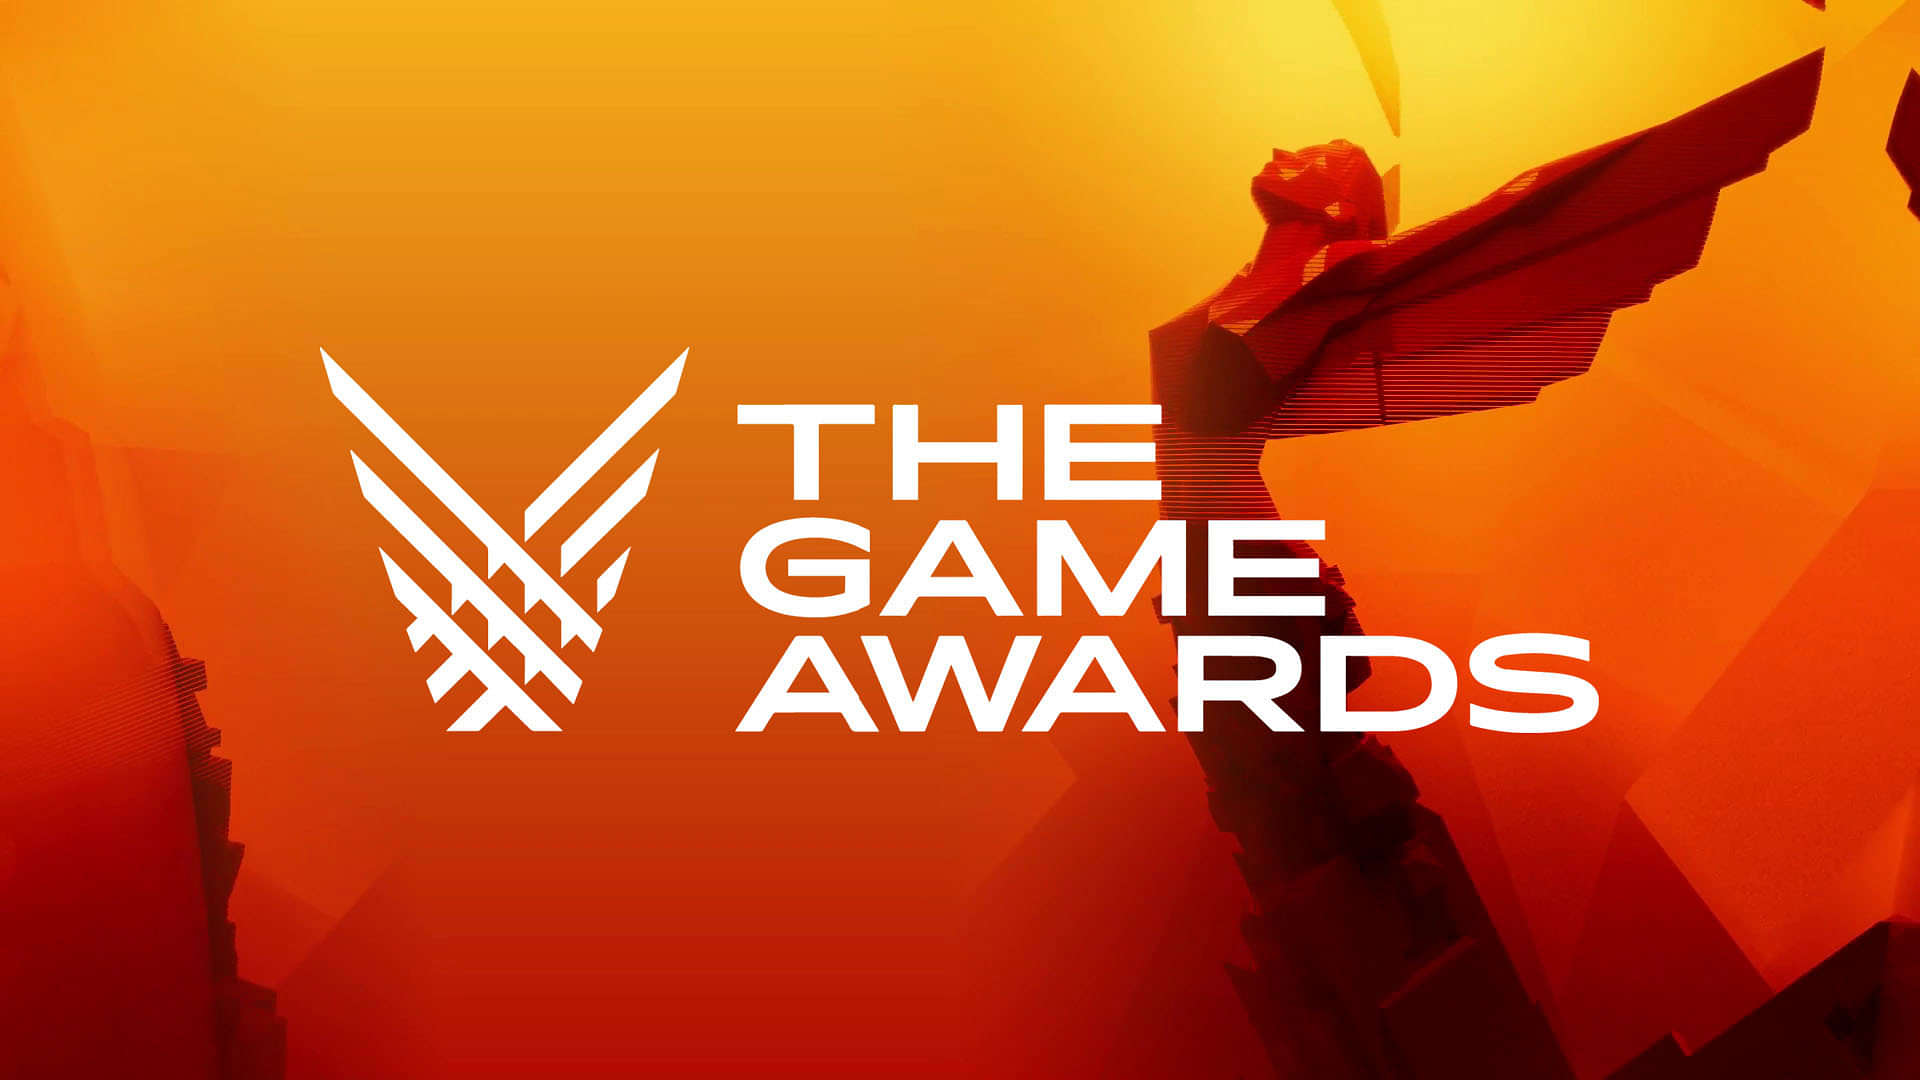 Everything Revealed At The Game Awards 2021